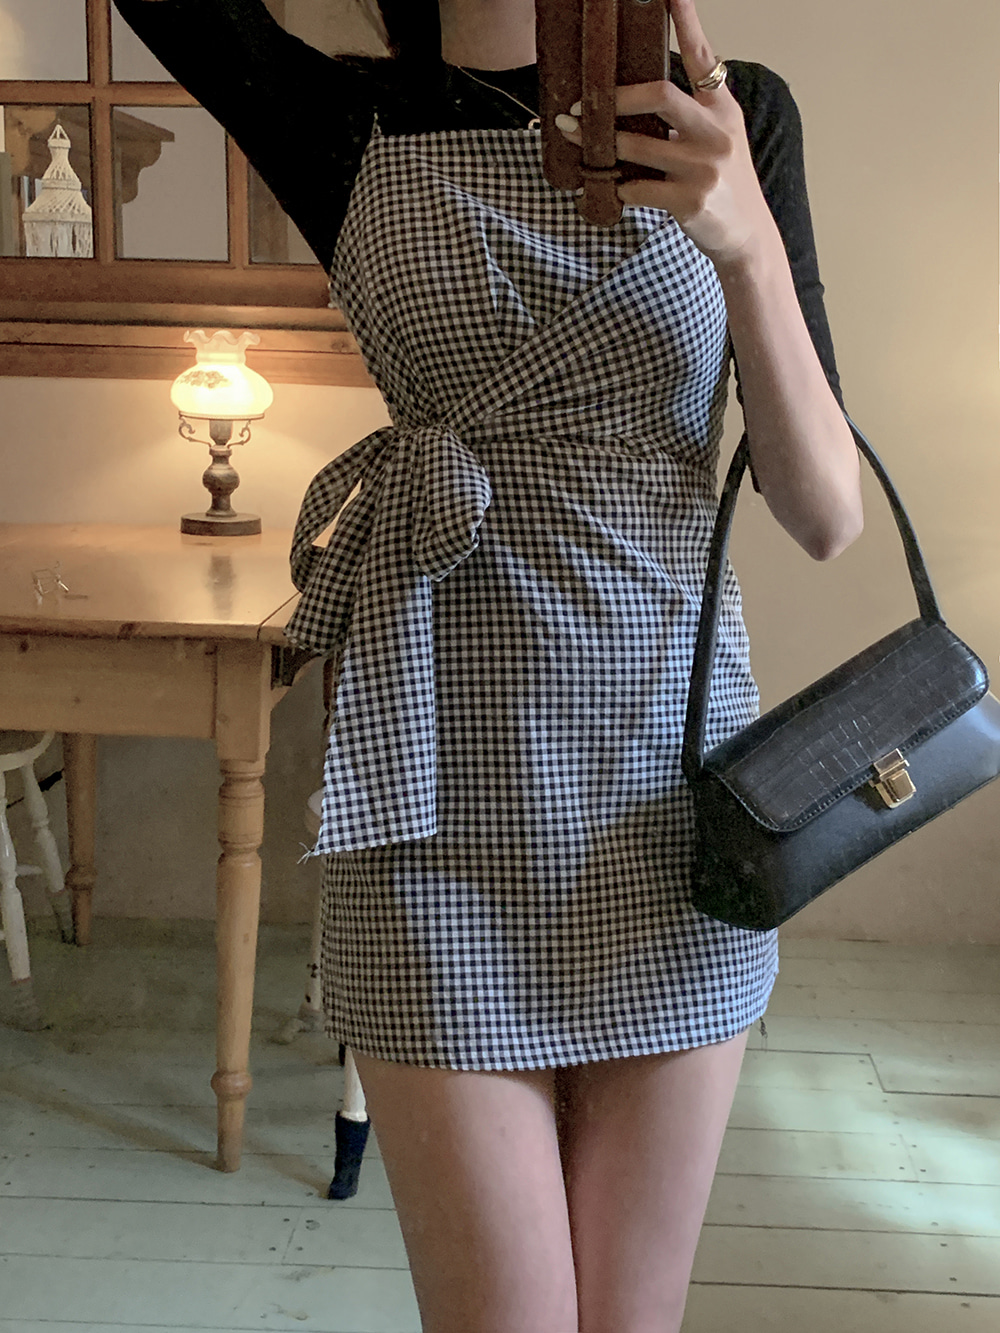 Small plaid bow summer ghost maiden strap dress